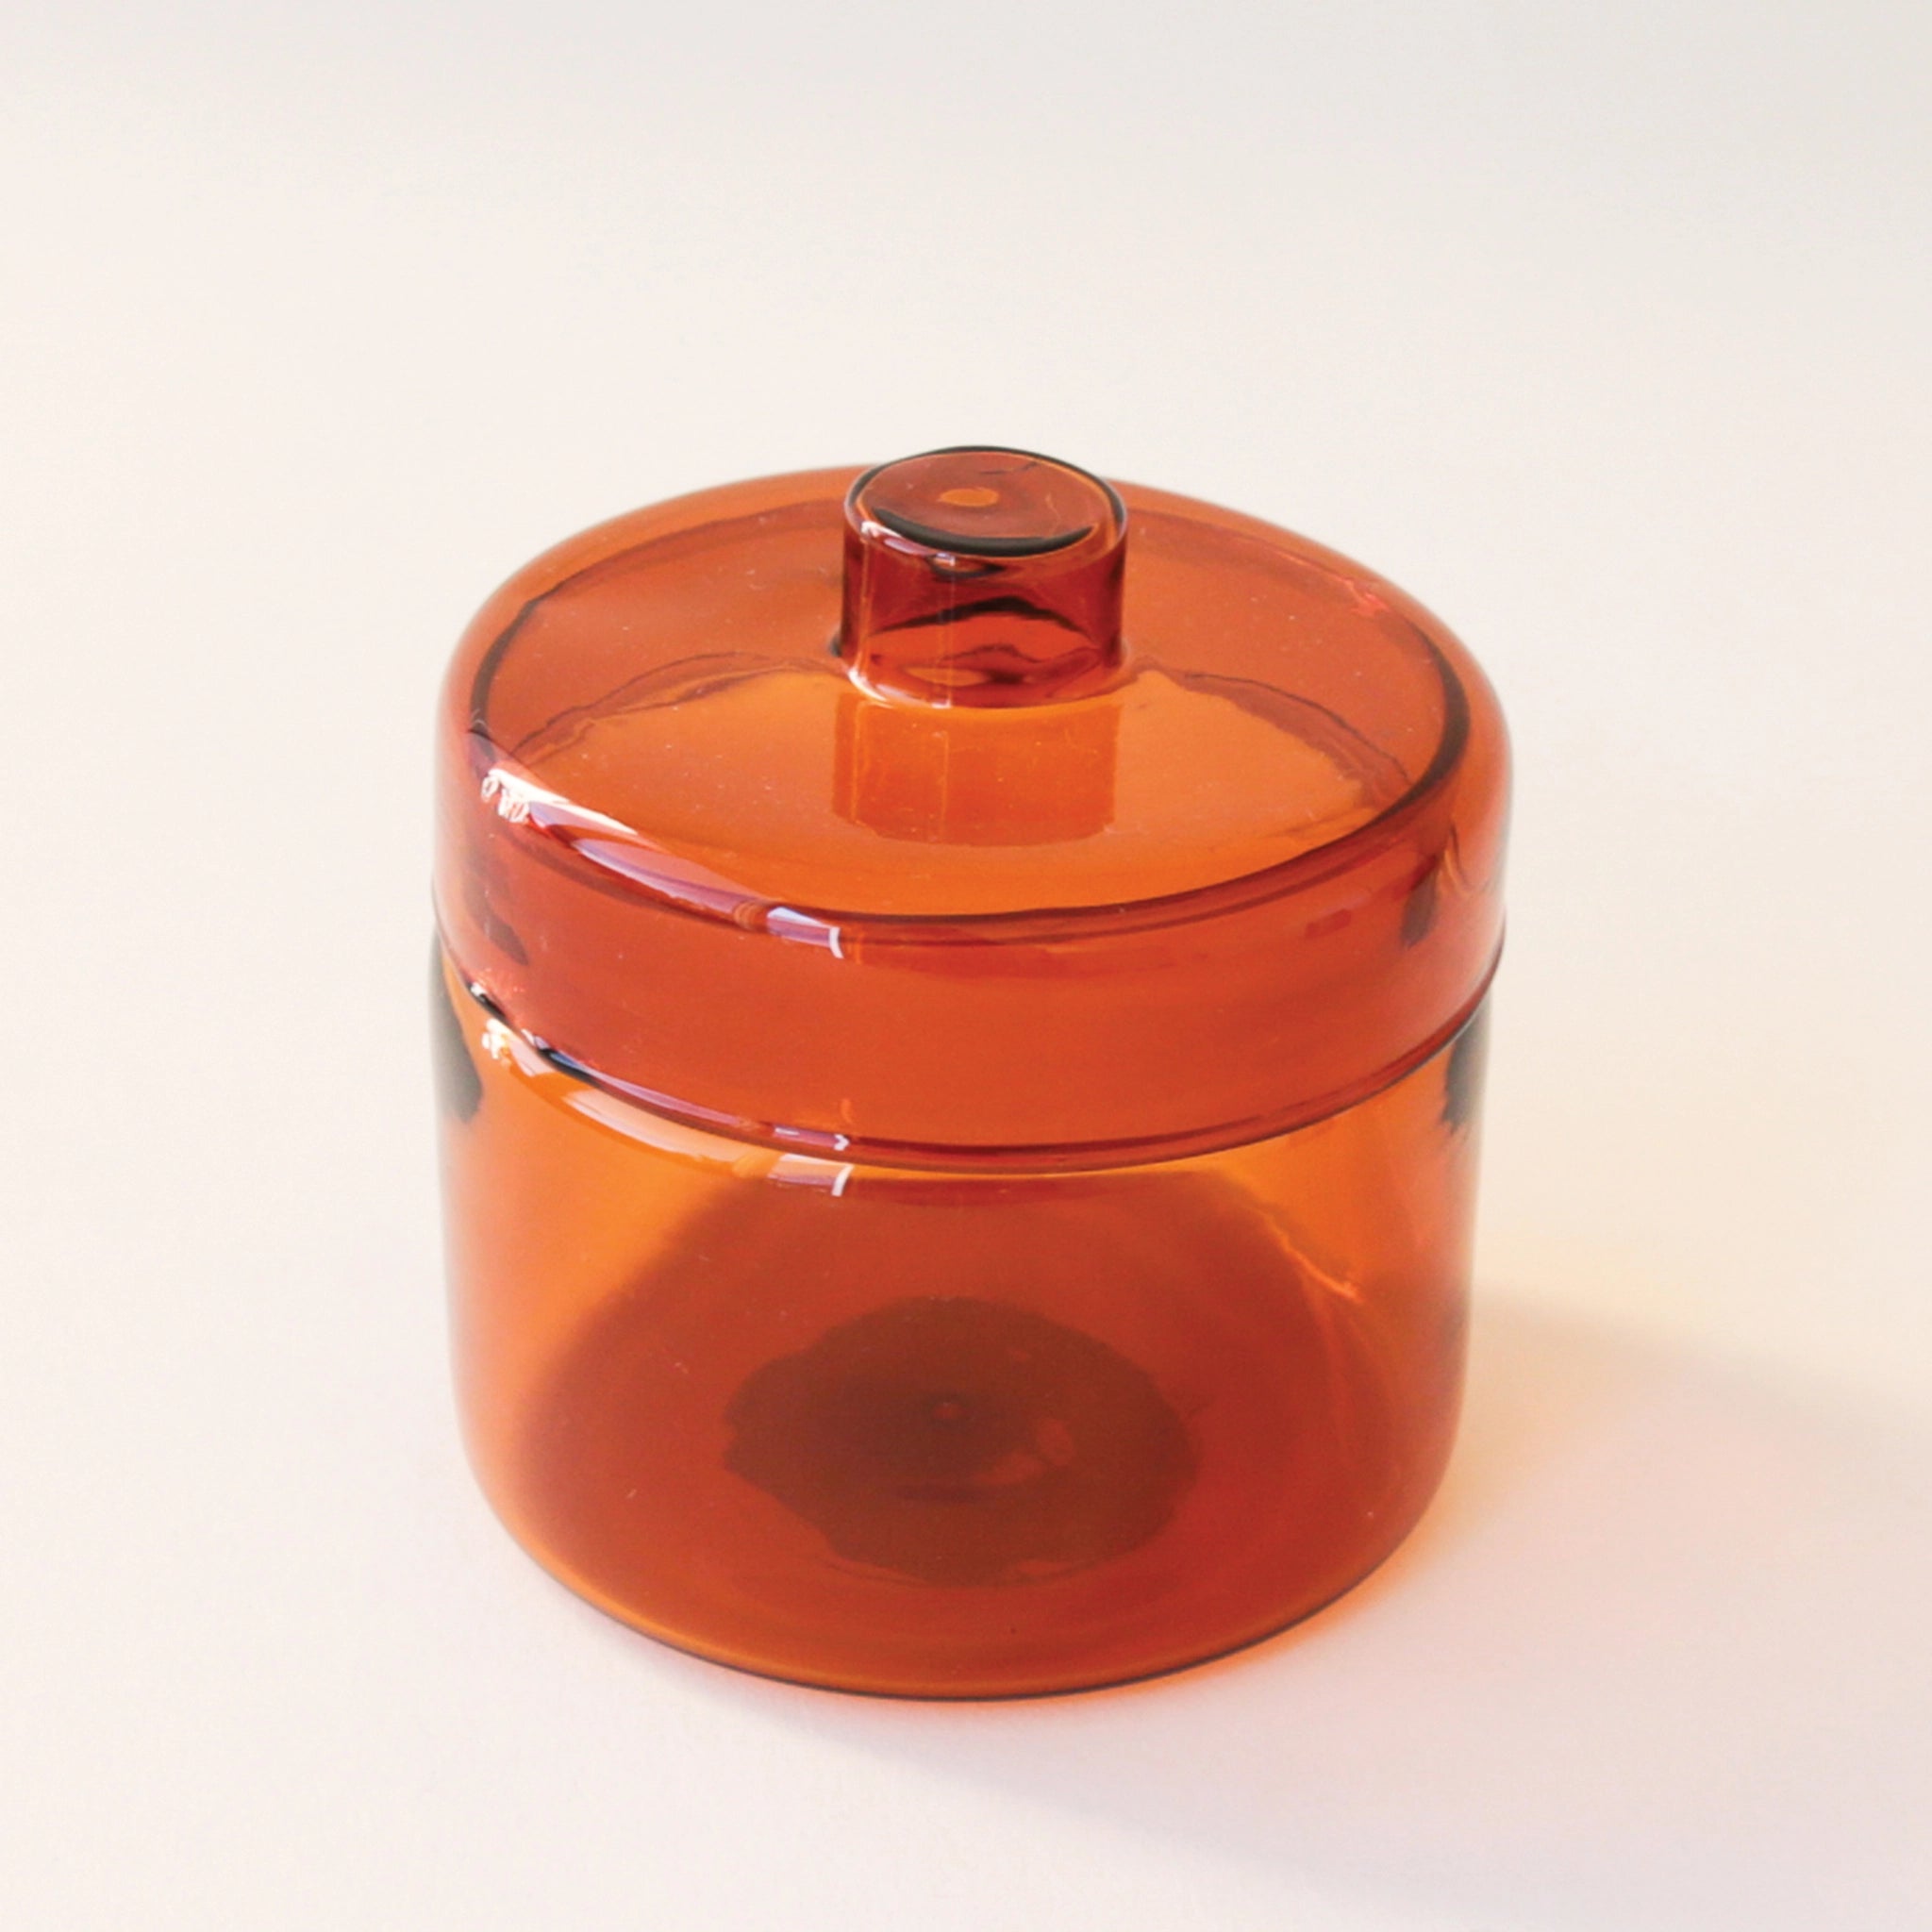 A round glass amber jar with a coordinating glass lid that has a round, flat knob on top.